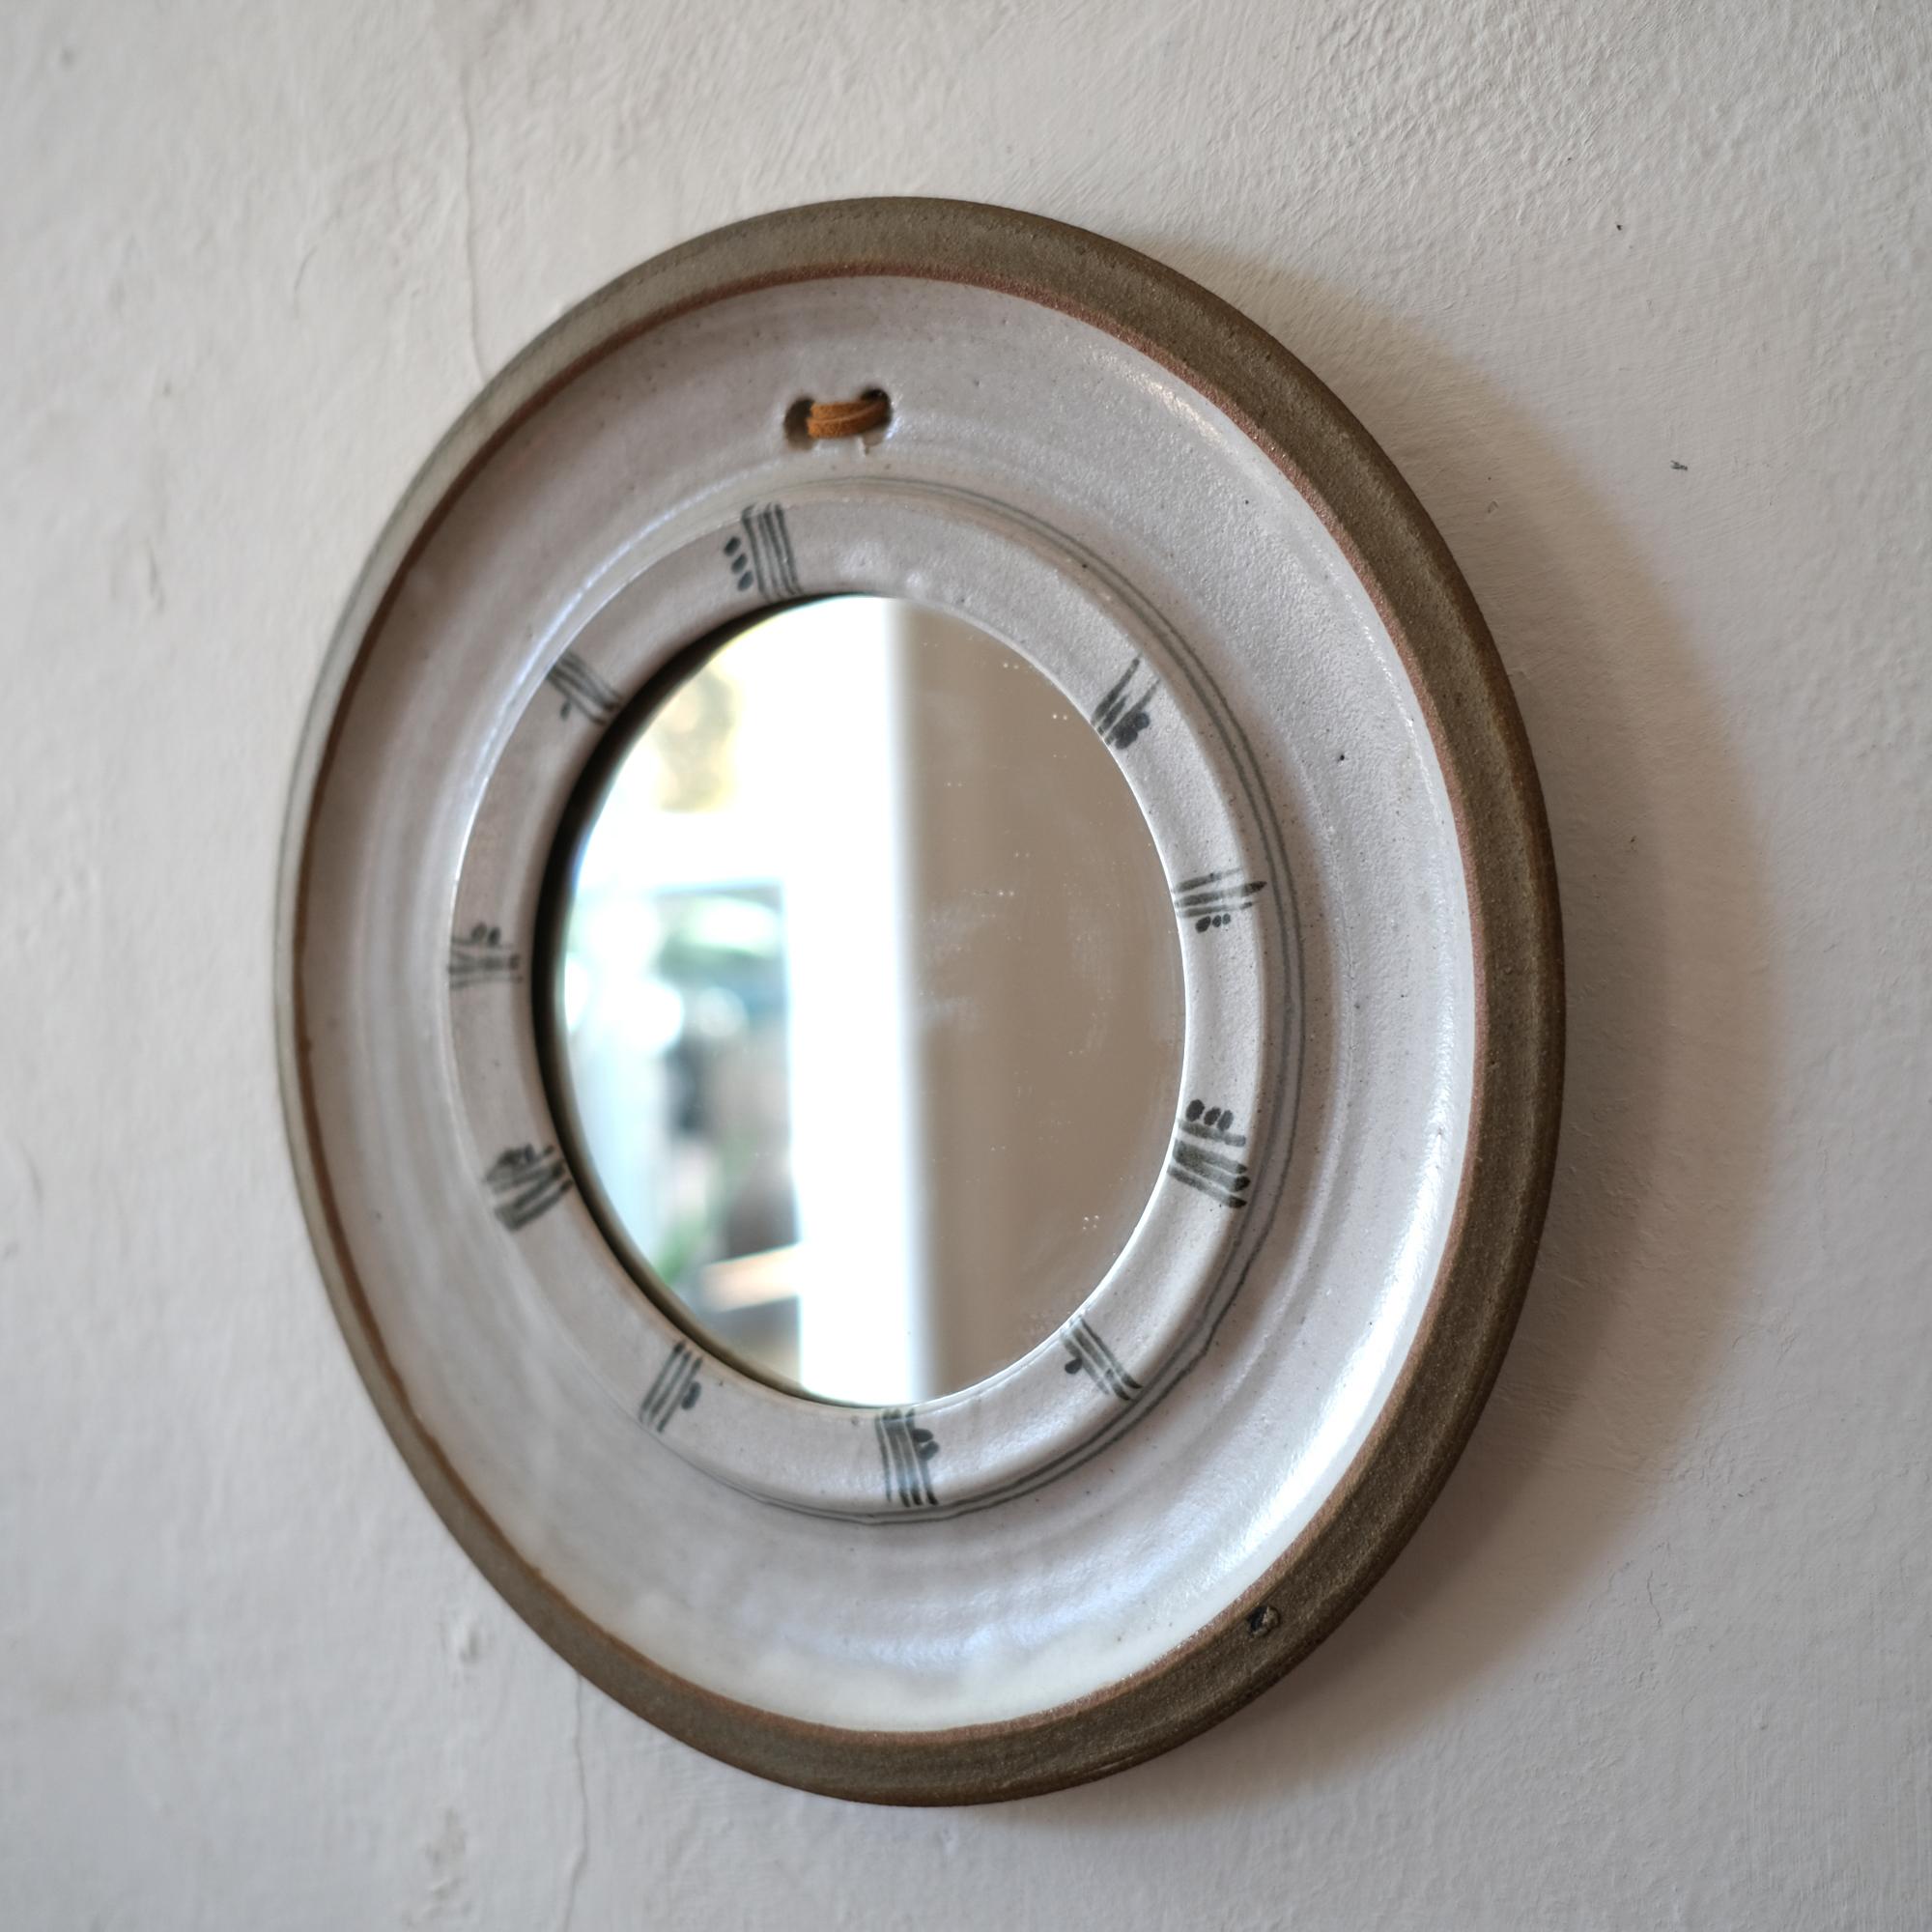 Hand thrown ceramic mirror, with leather hanger, 1960s.